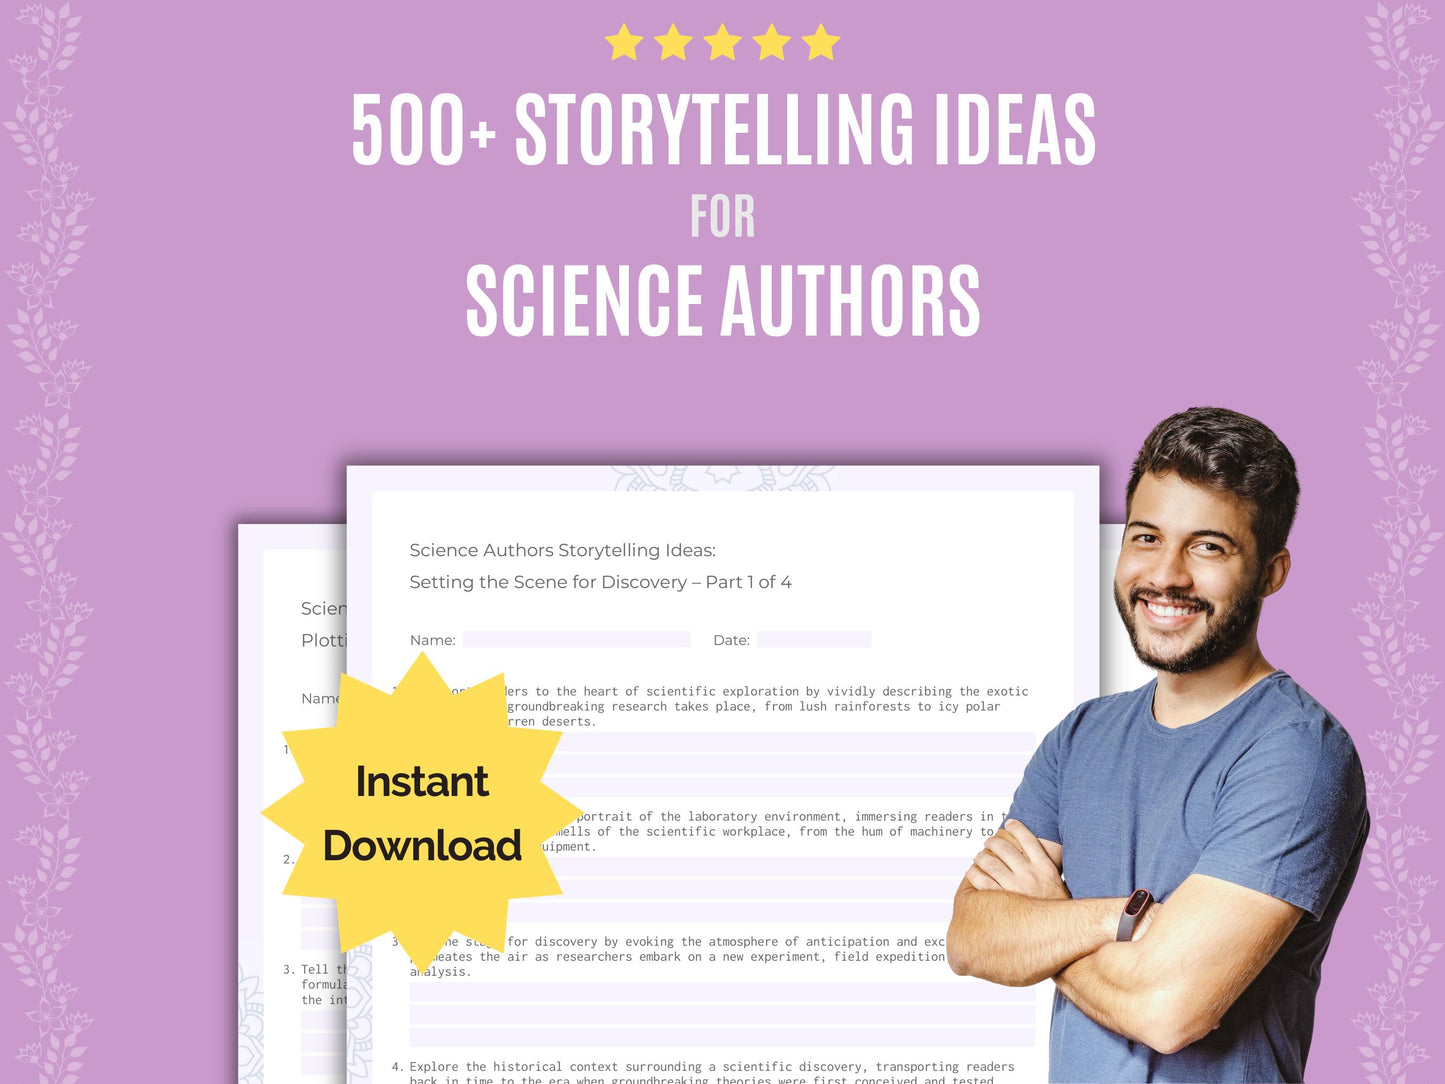 Science Authors Storytelling Ideas